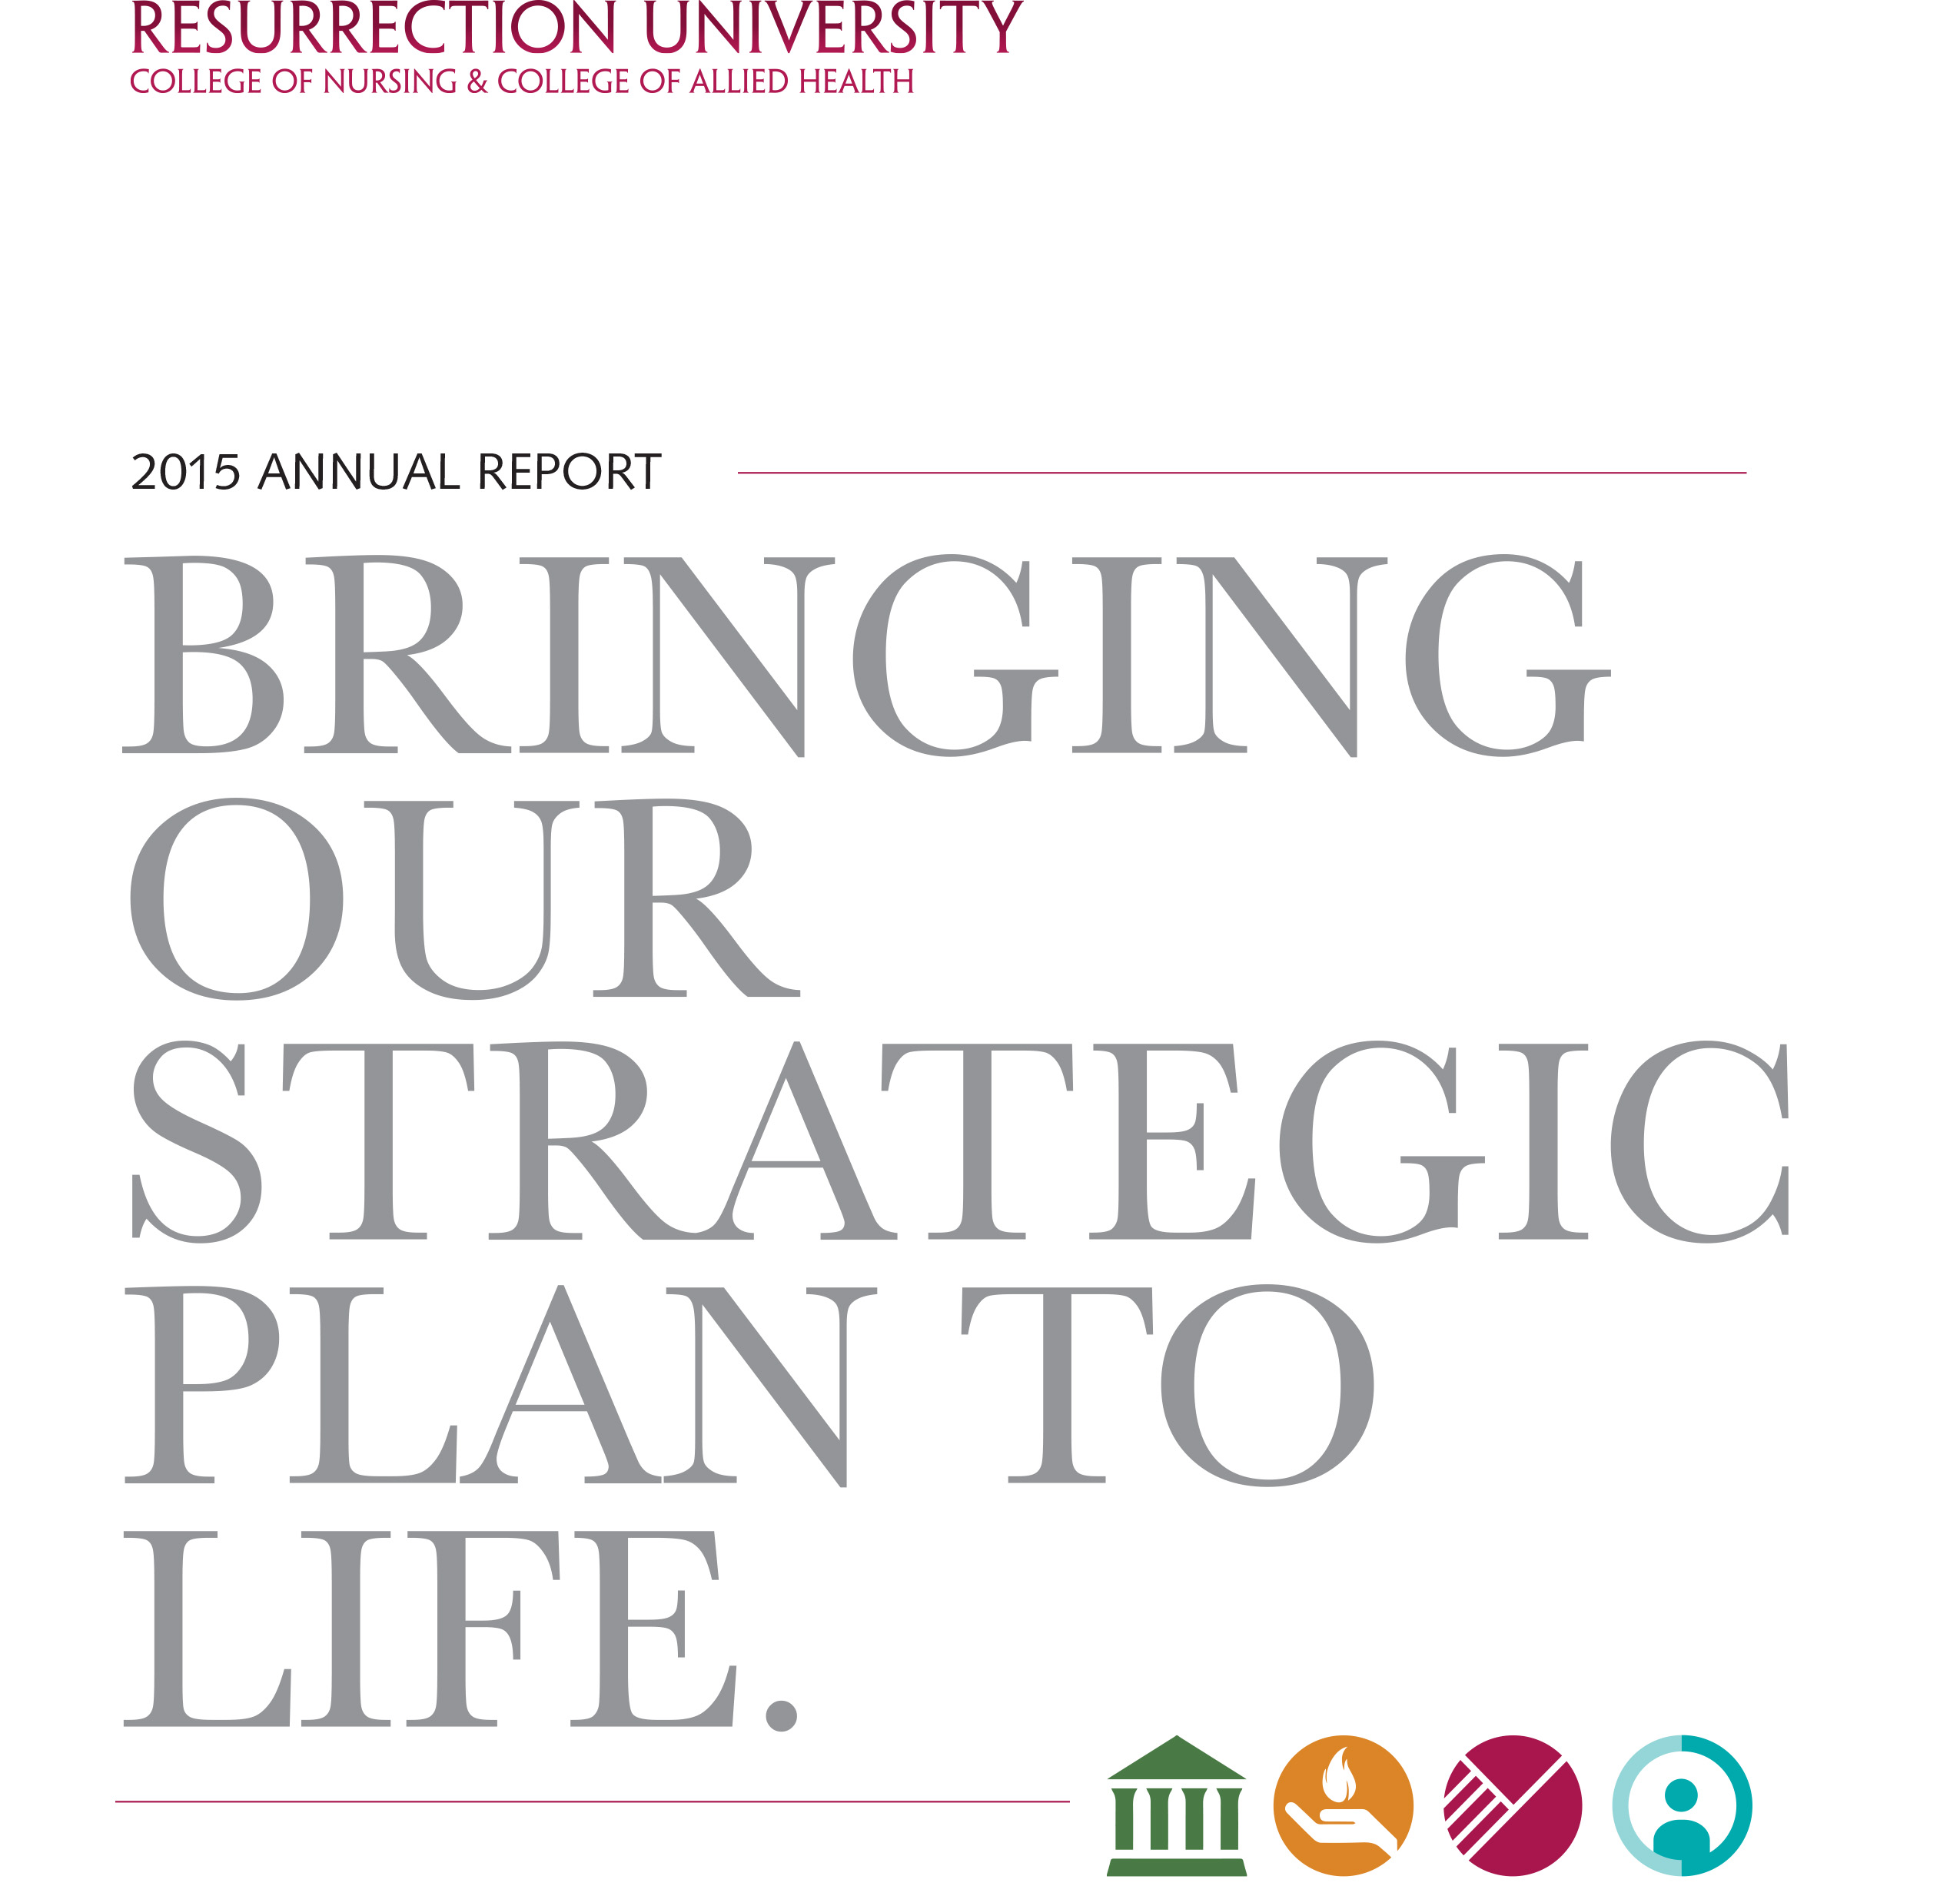 Annual Report for 2014-2015